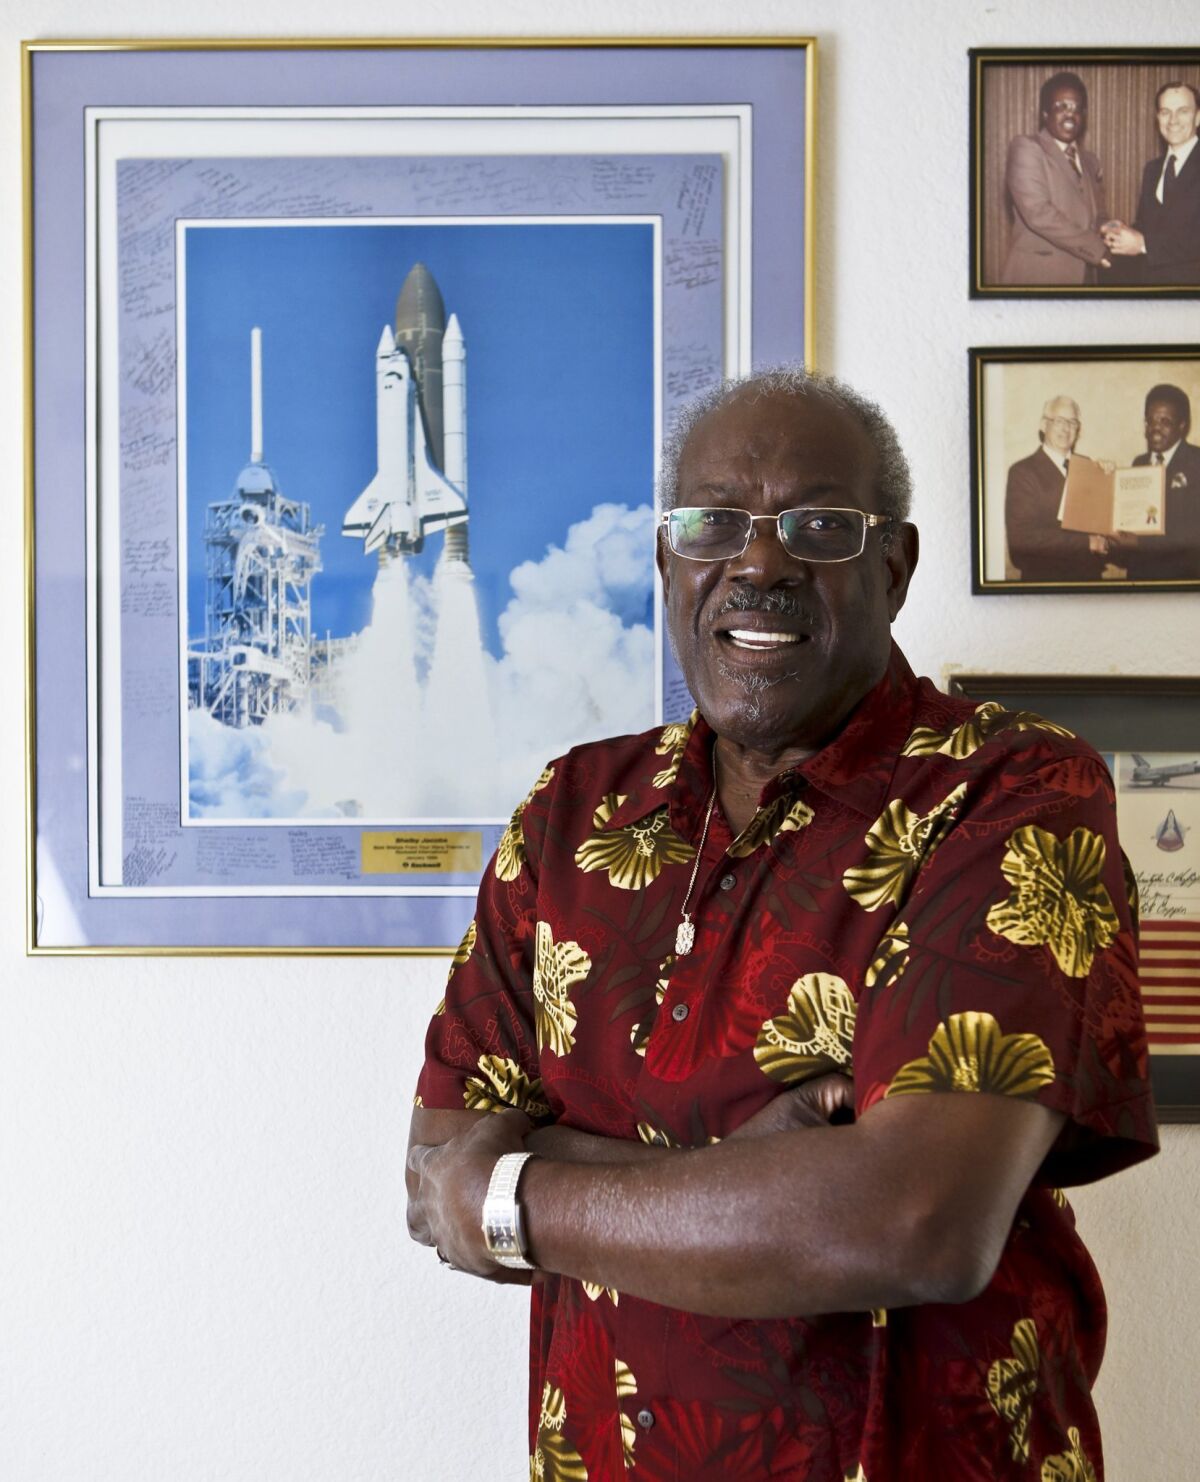 Shelby Jacobs, who turns 80 on April 27, pictured with some of his space program mementos at his Oceanside home.